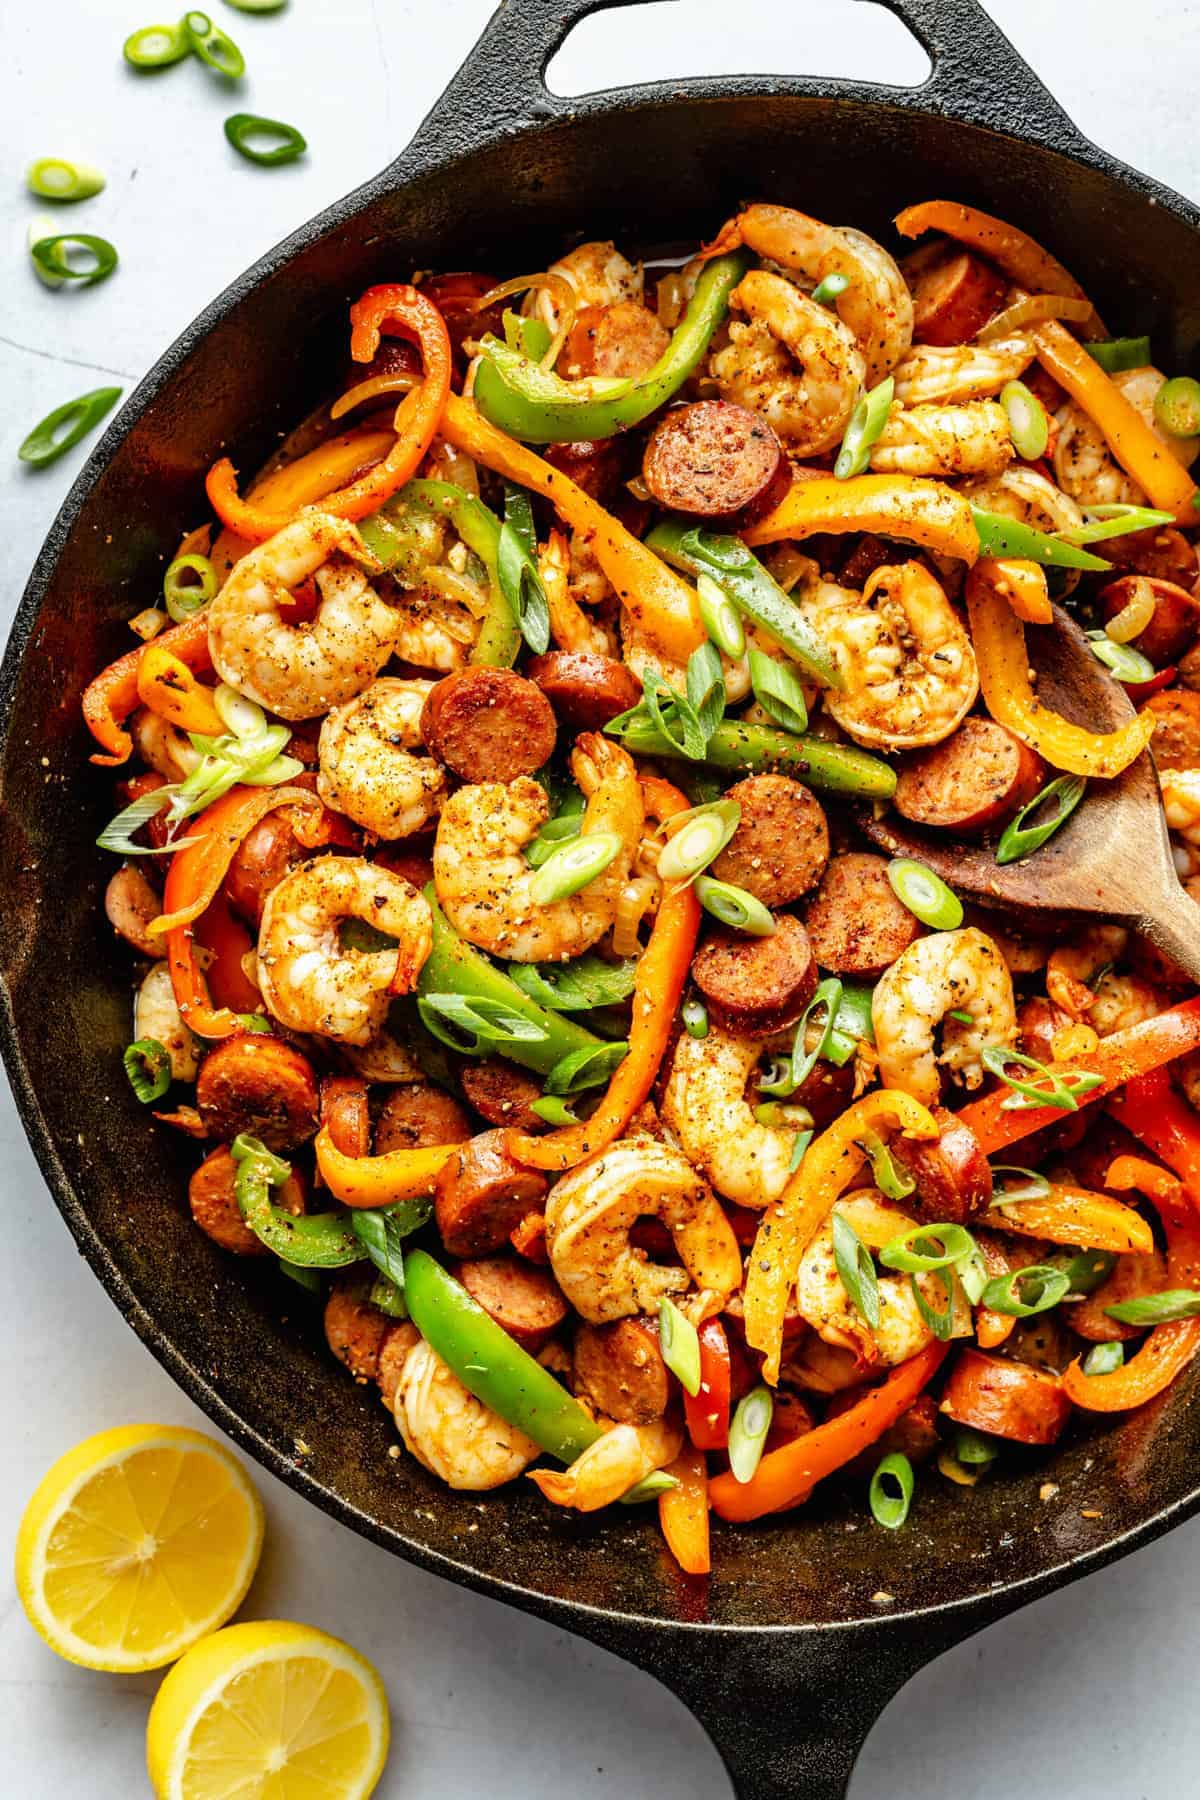 Sausage, shrimp, and peppers in a skillet.